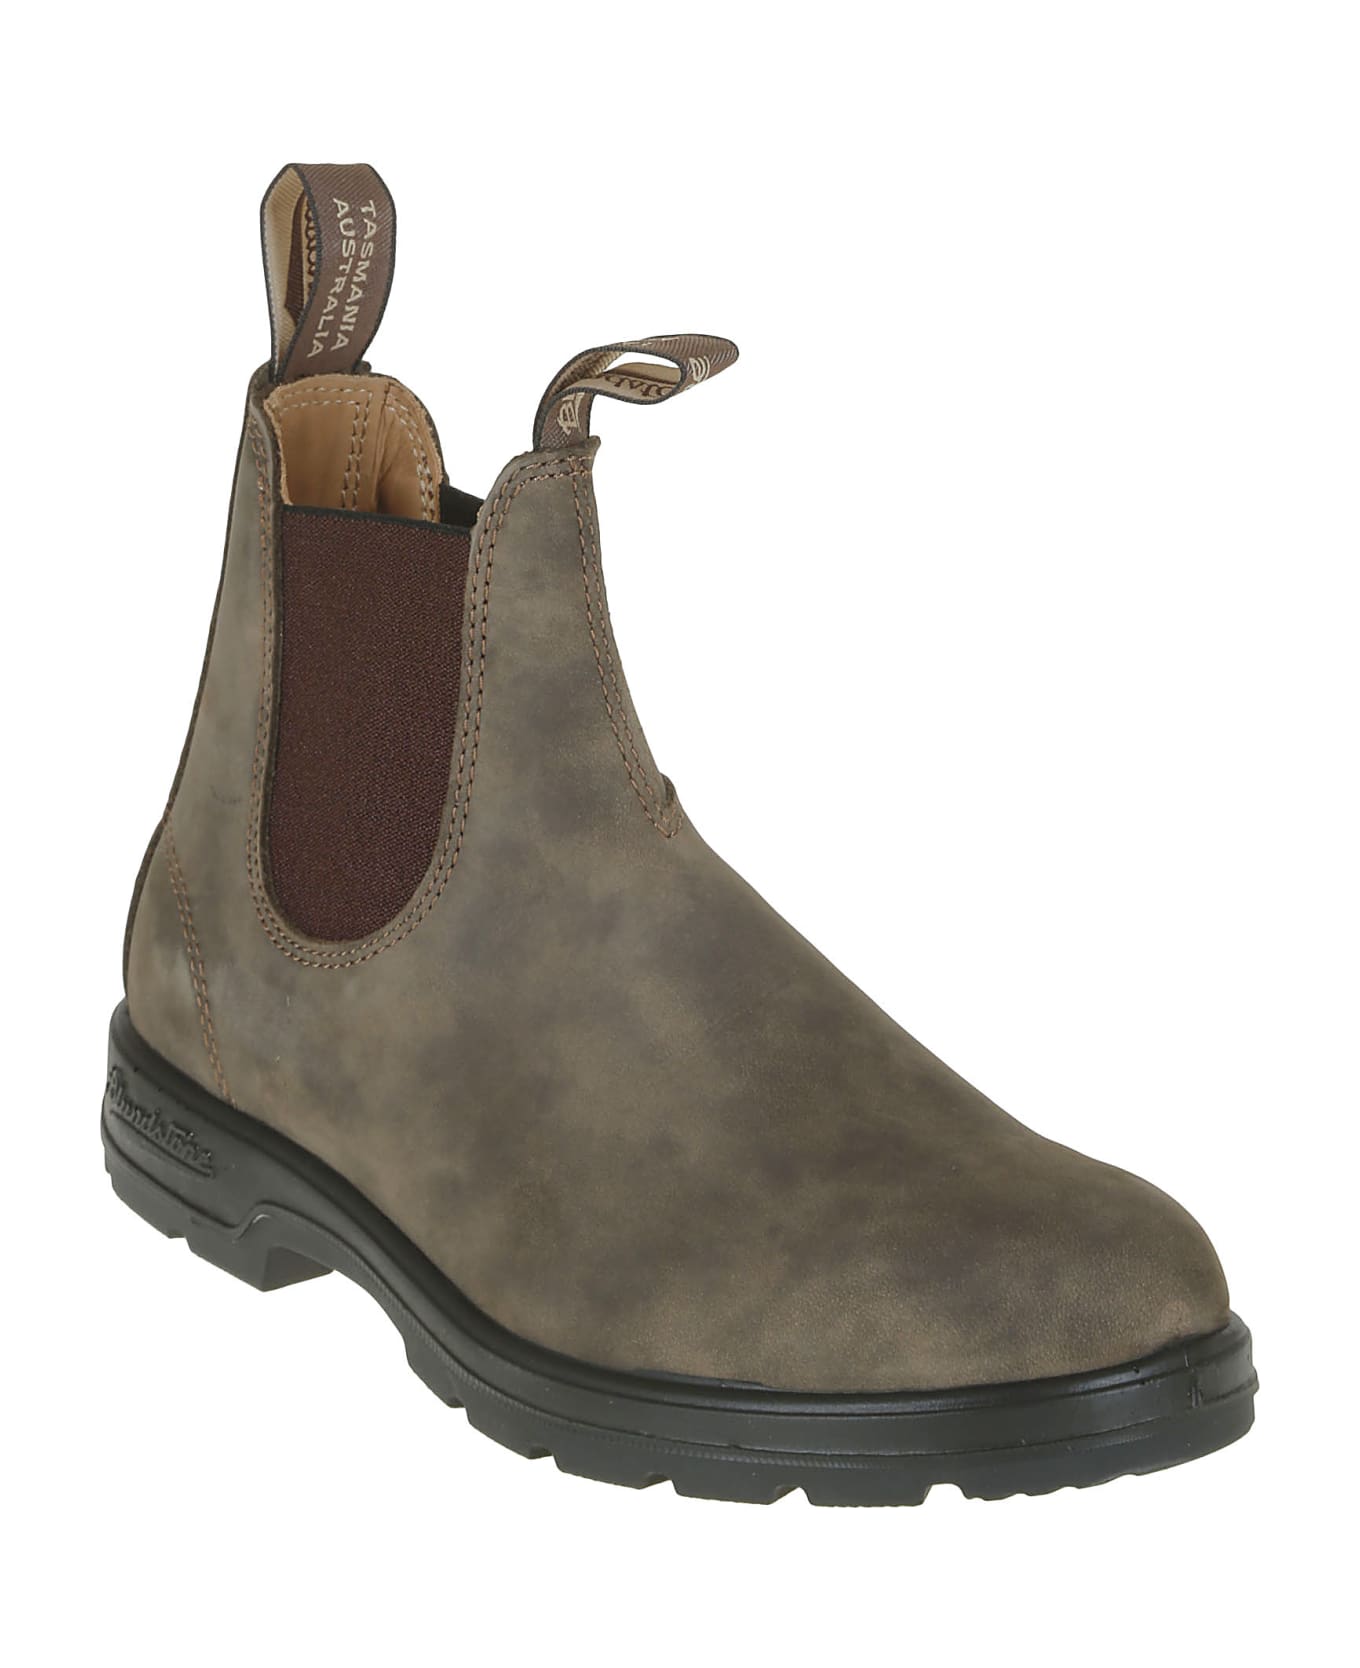 Blundstone 585 Rustic Brown Leather - Rustic Brown ブーツ